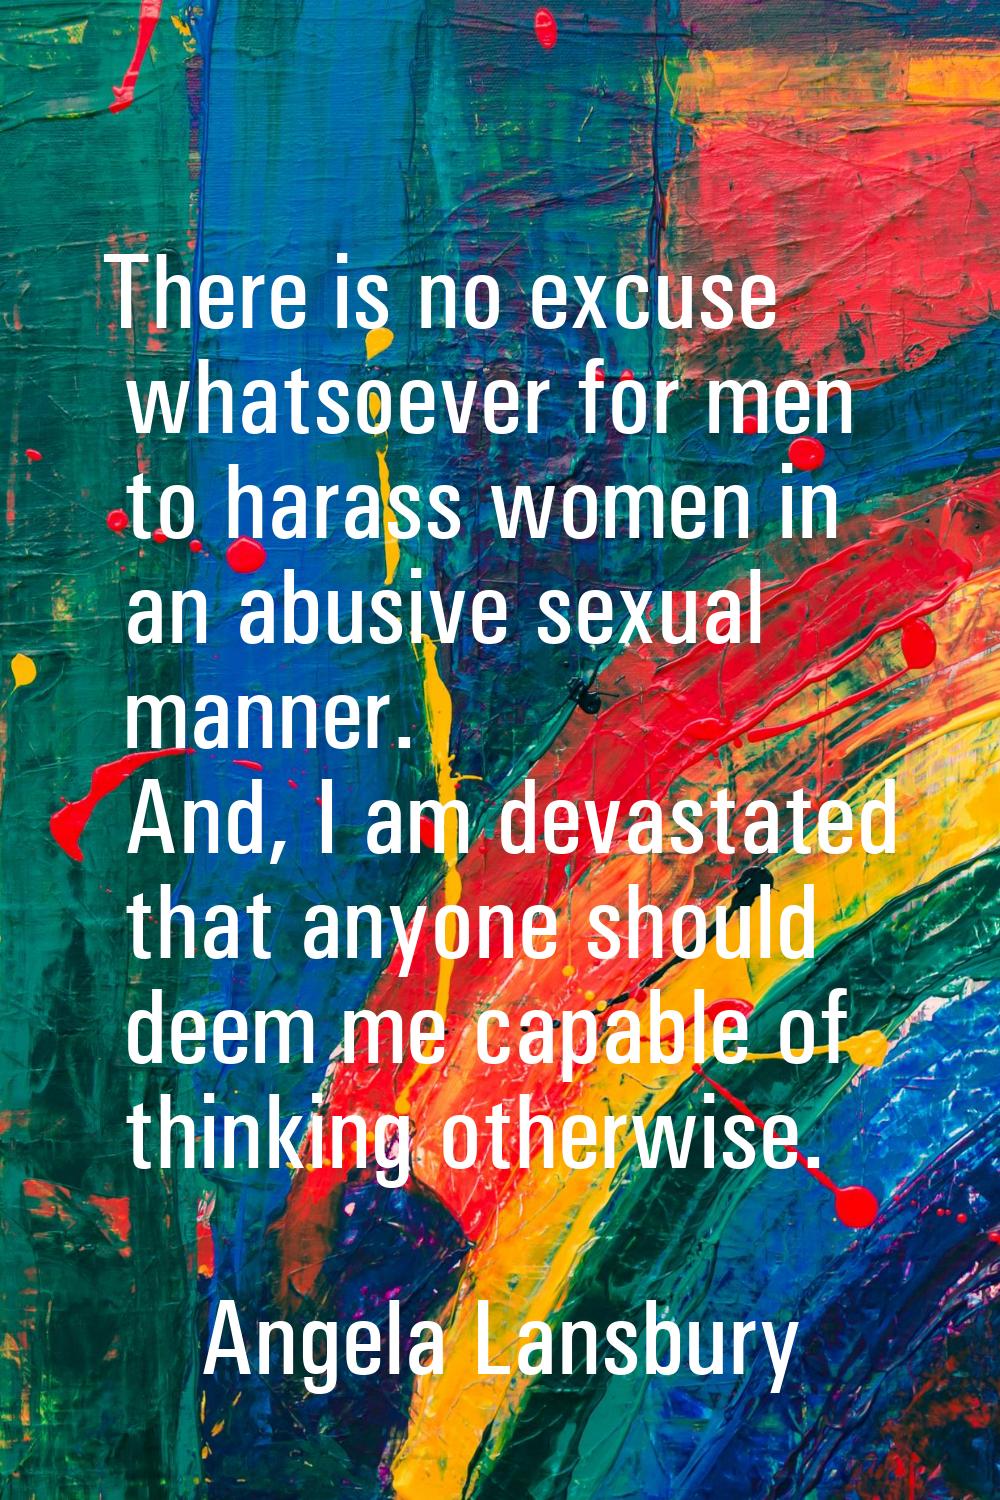 There is no excuse whatsoever for men to harass women in an abusive sexual manner. And, I am devast